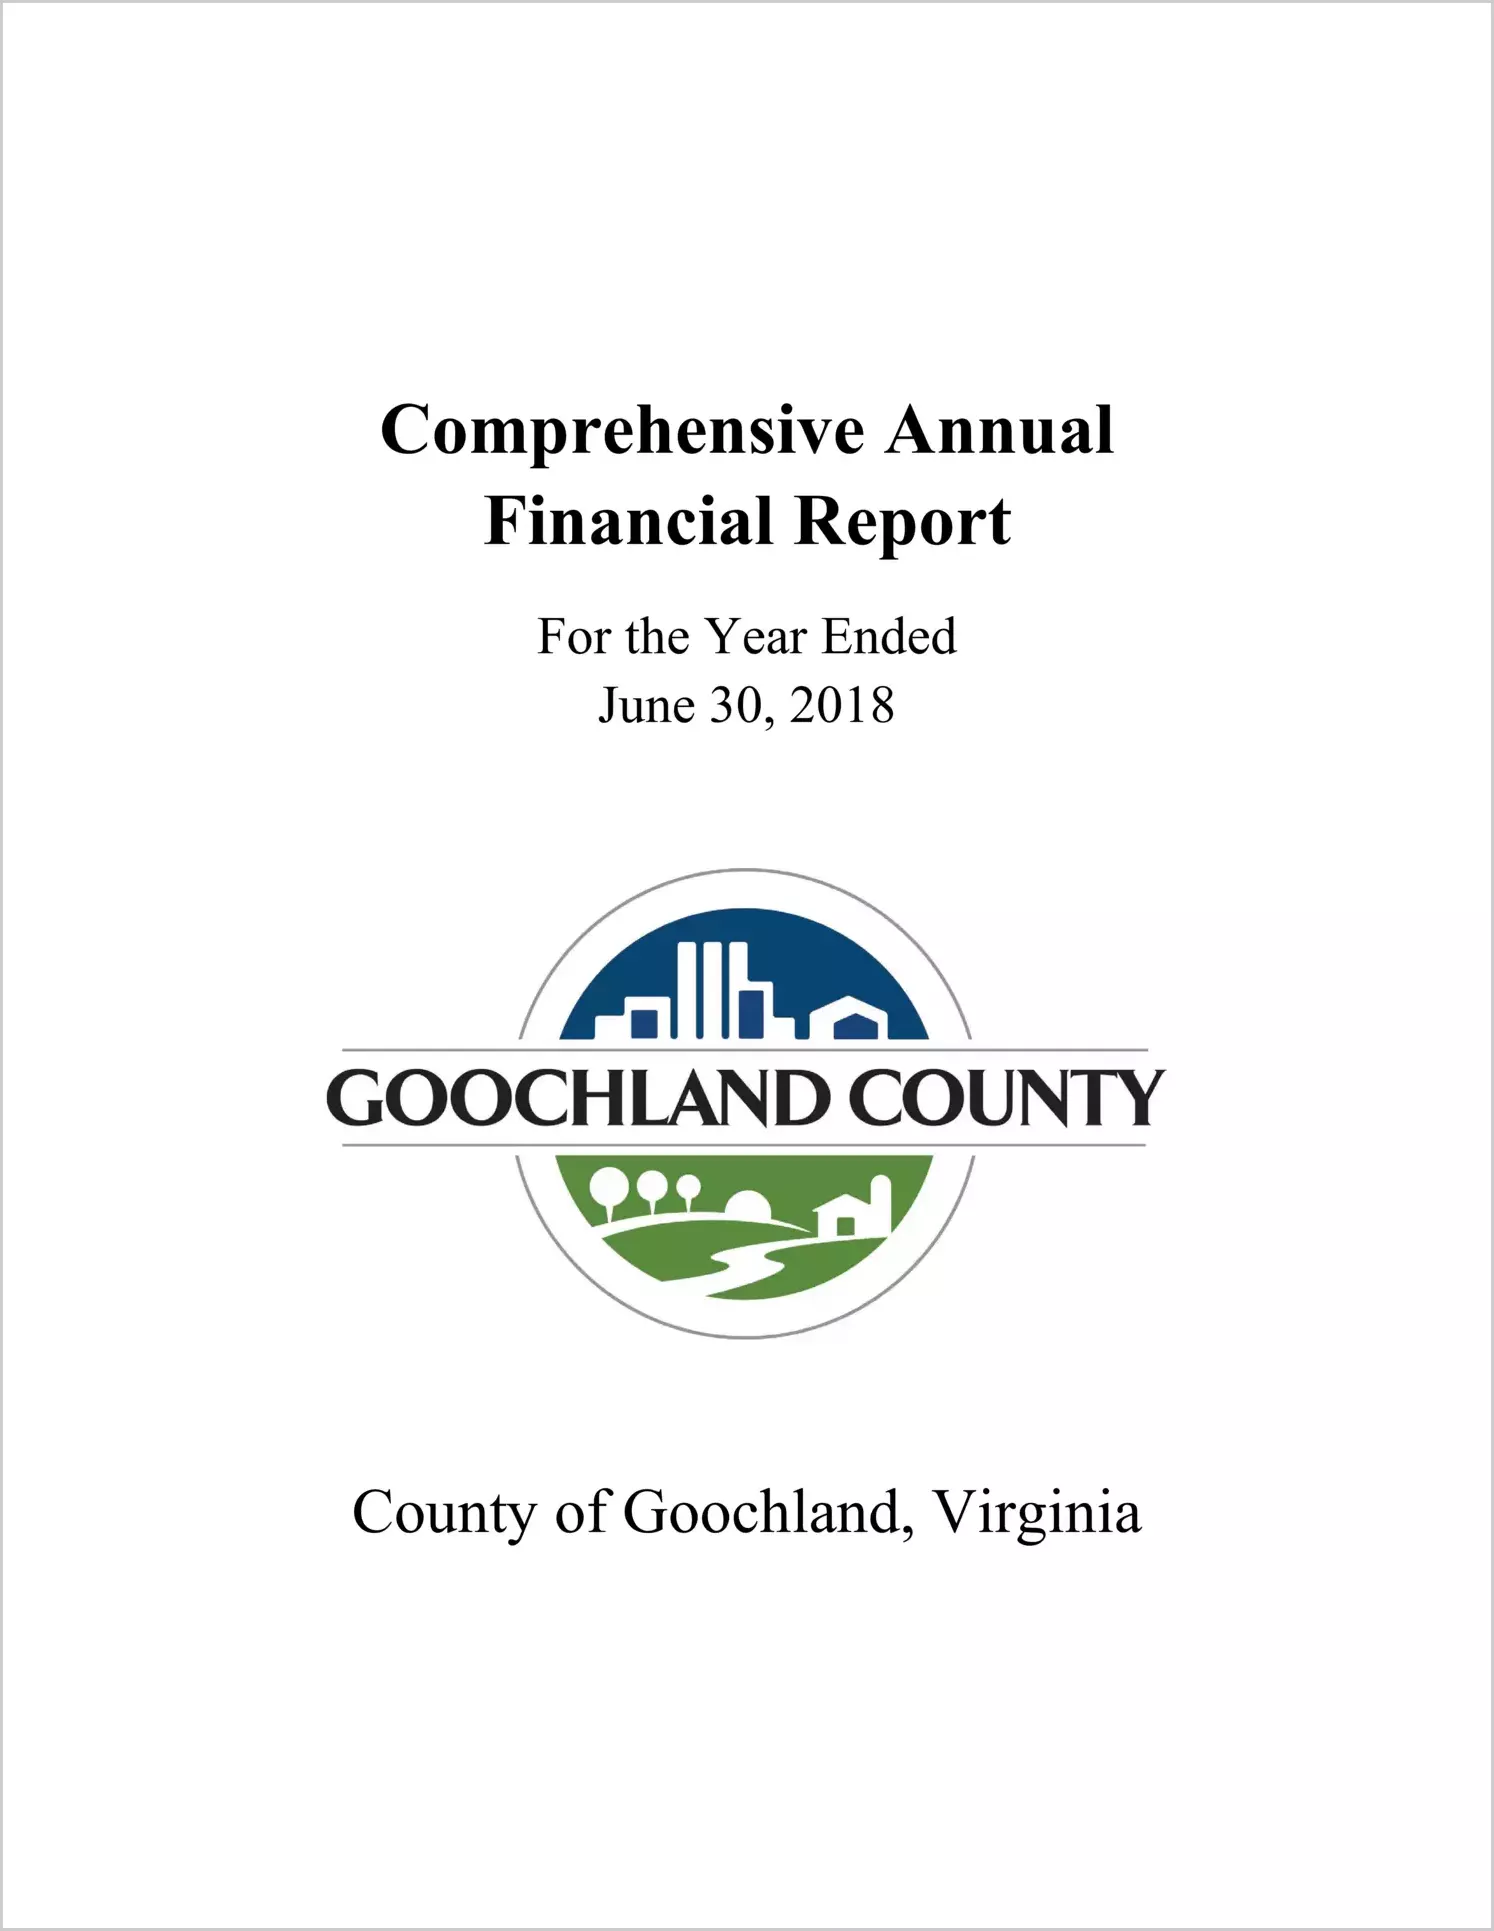 2018 Annual Financial Report for County of Goochland